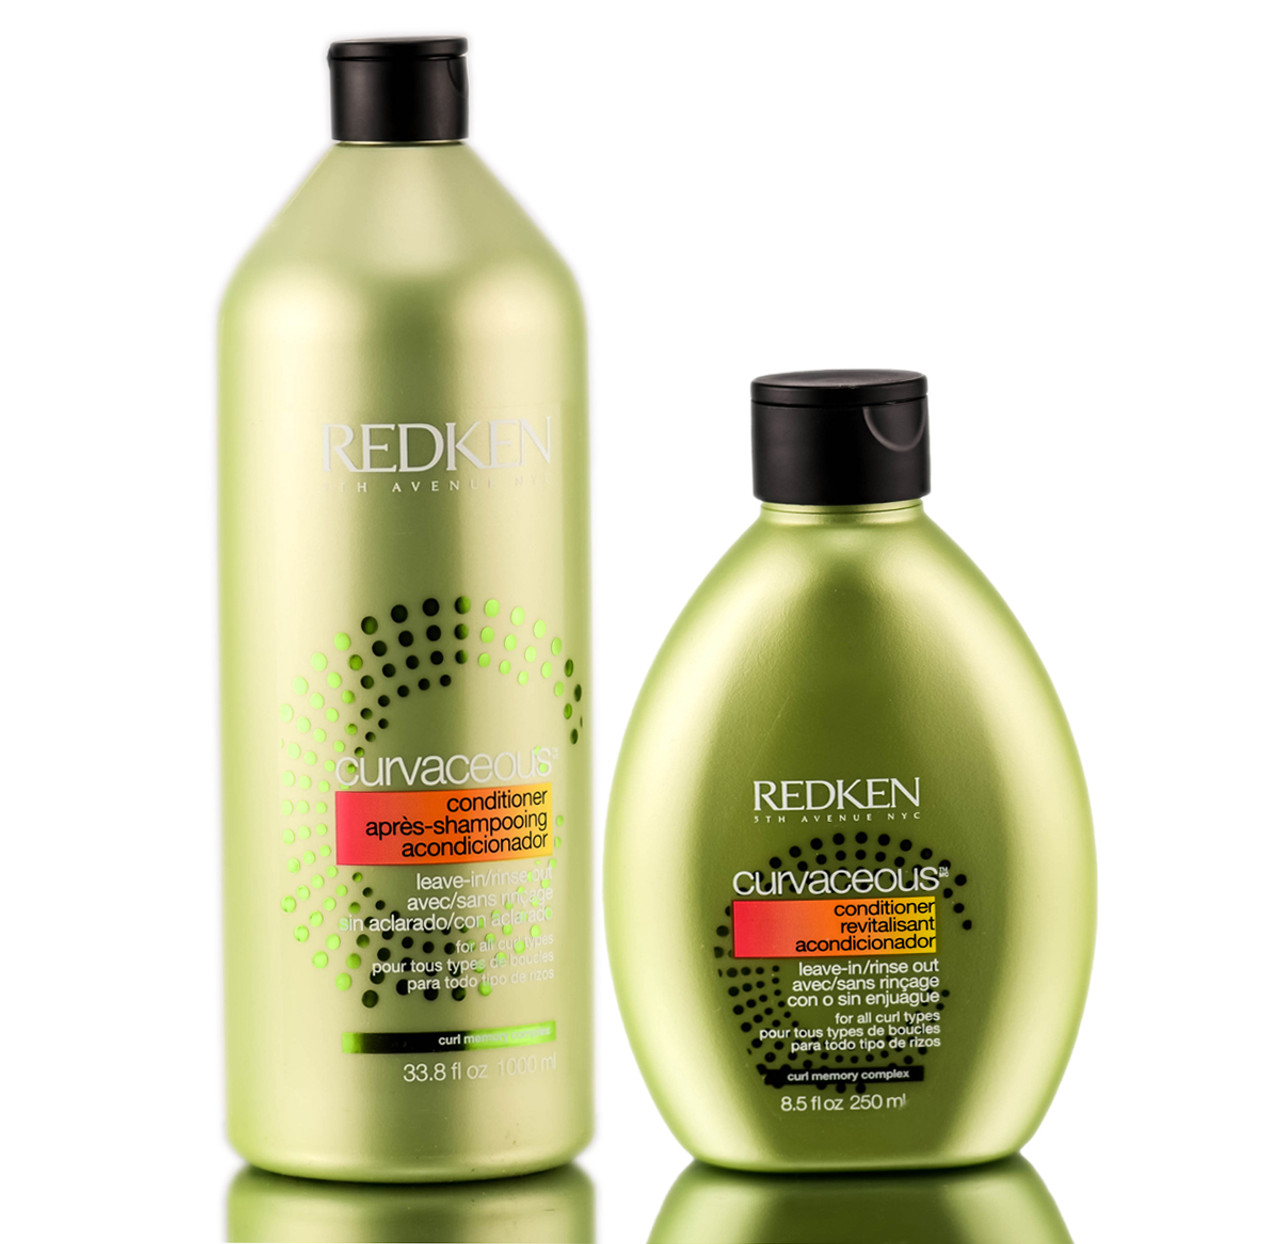  Redken  Curvaceous  Leave in Rinse Out Conditioner  